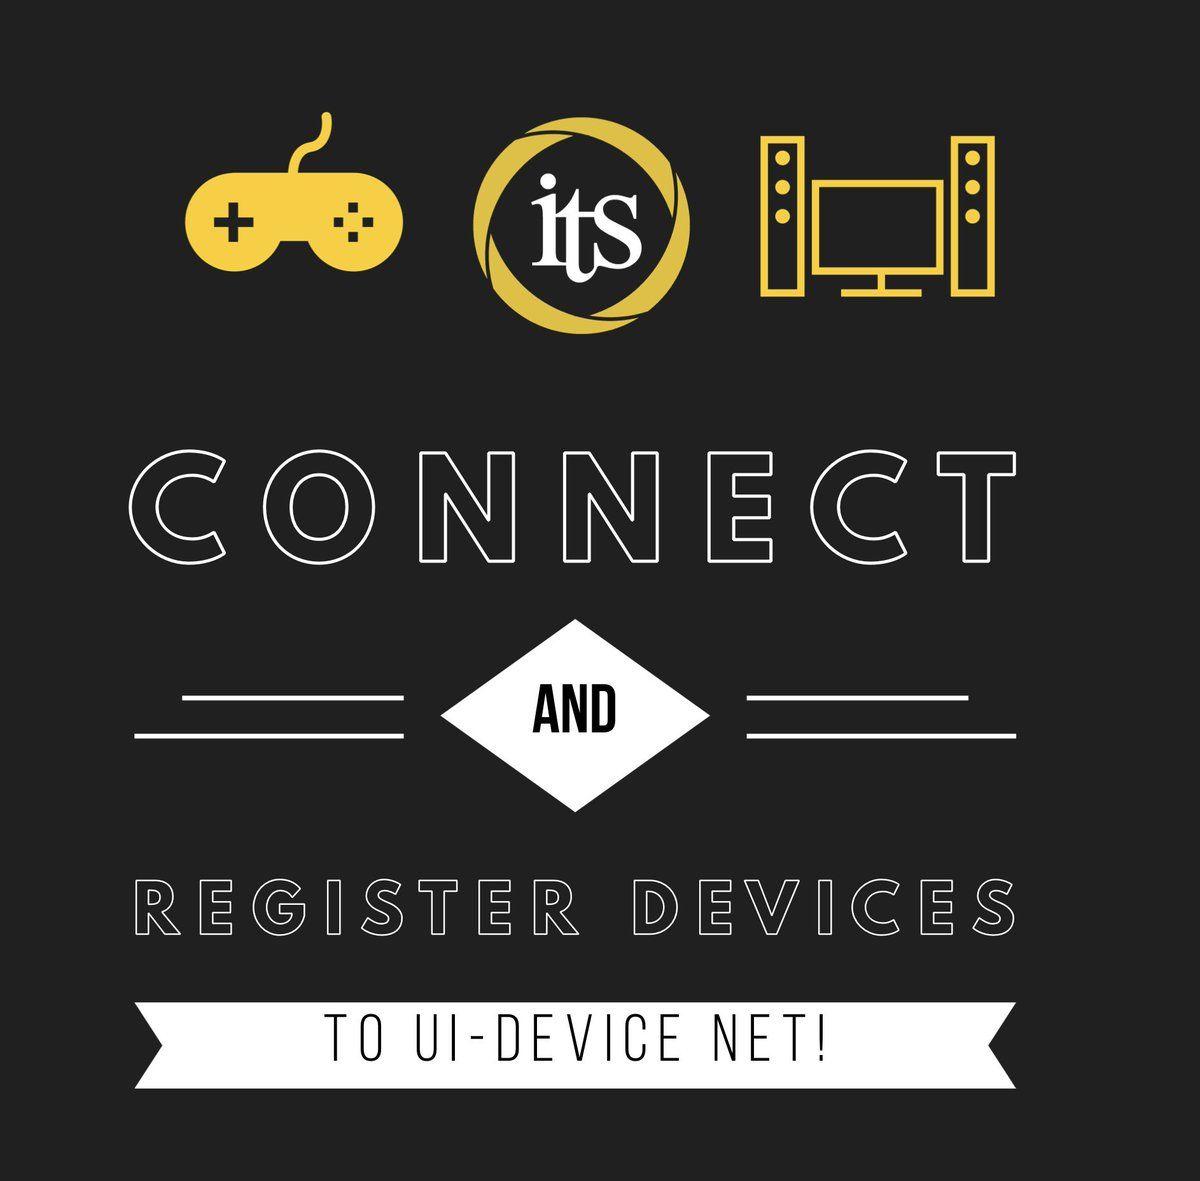 Brand of Entertainment Devices Logo - ITS University Of IA DeviceNet Is The Wireless